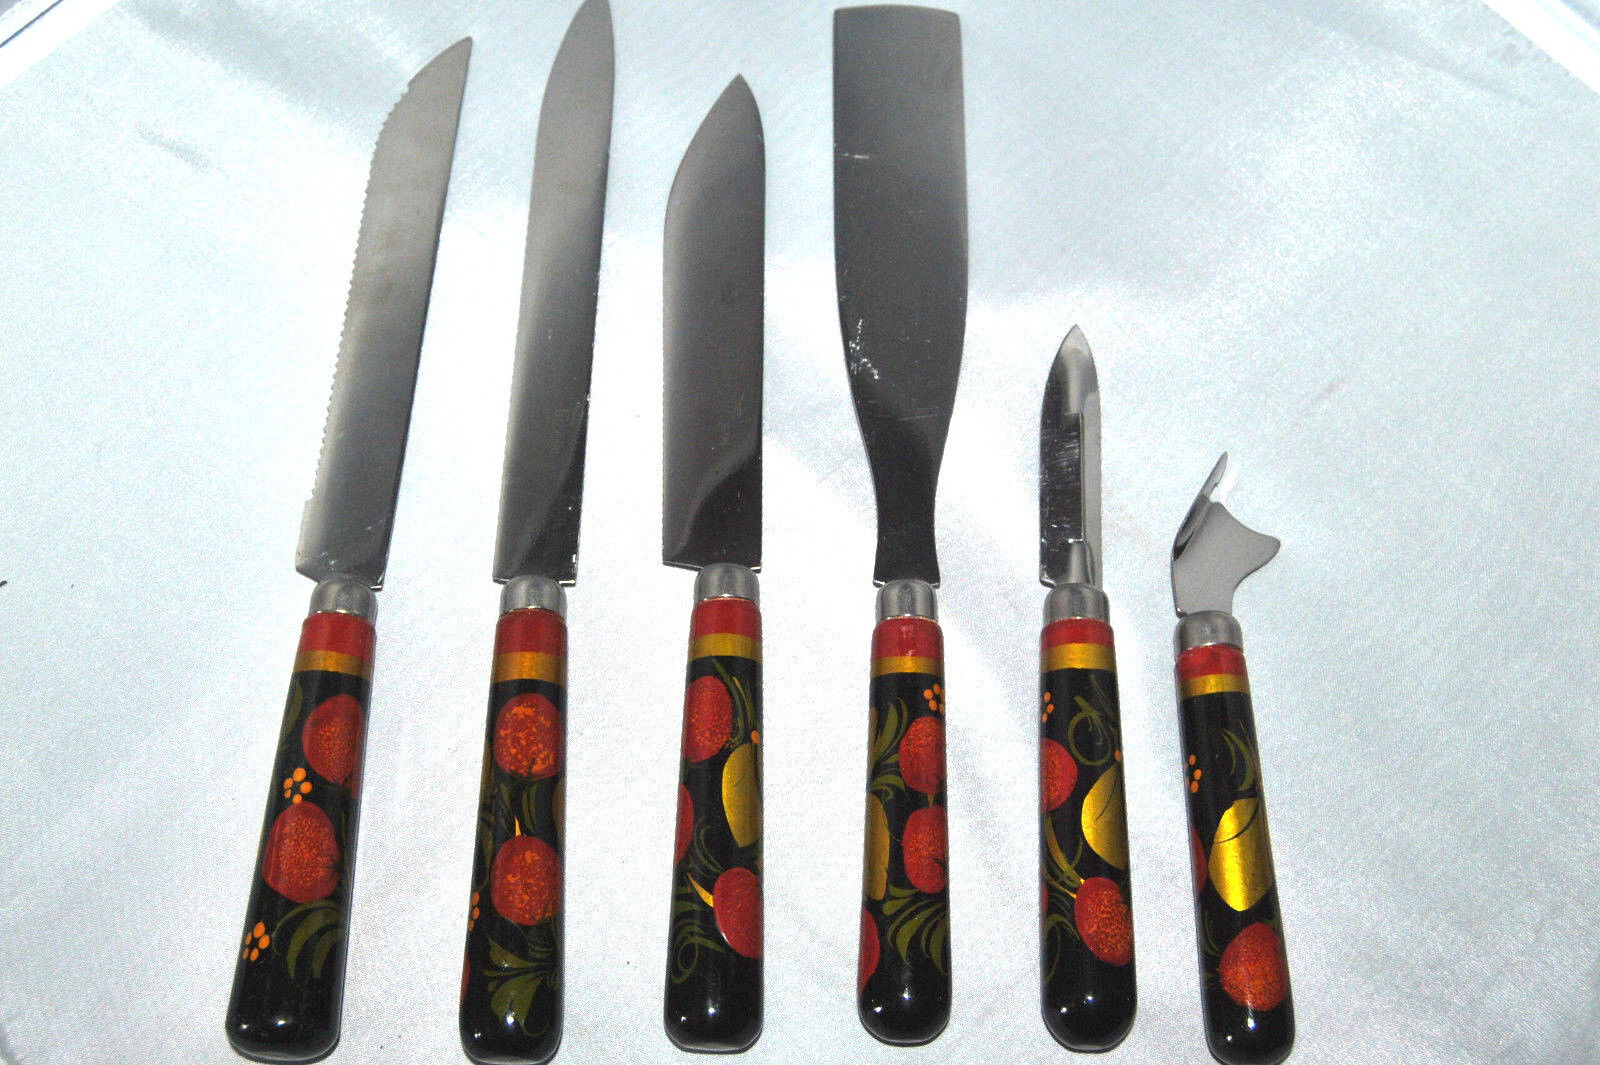 Vintage Russian Hand painted Kitchen Knifes Set Khokhloma Made in USSR in 1970s